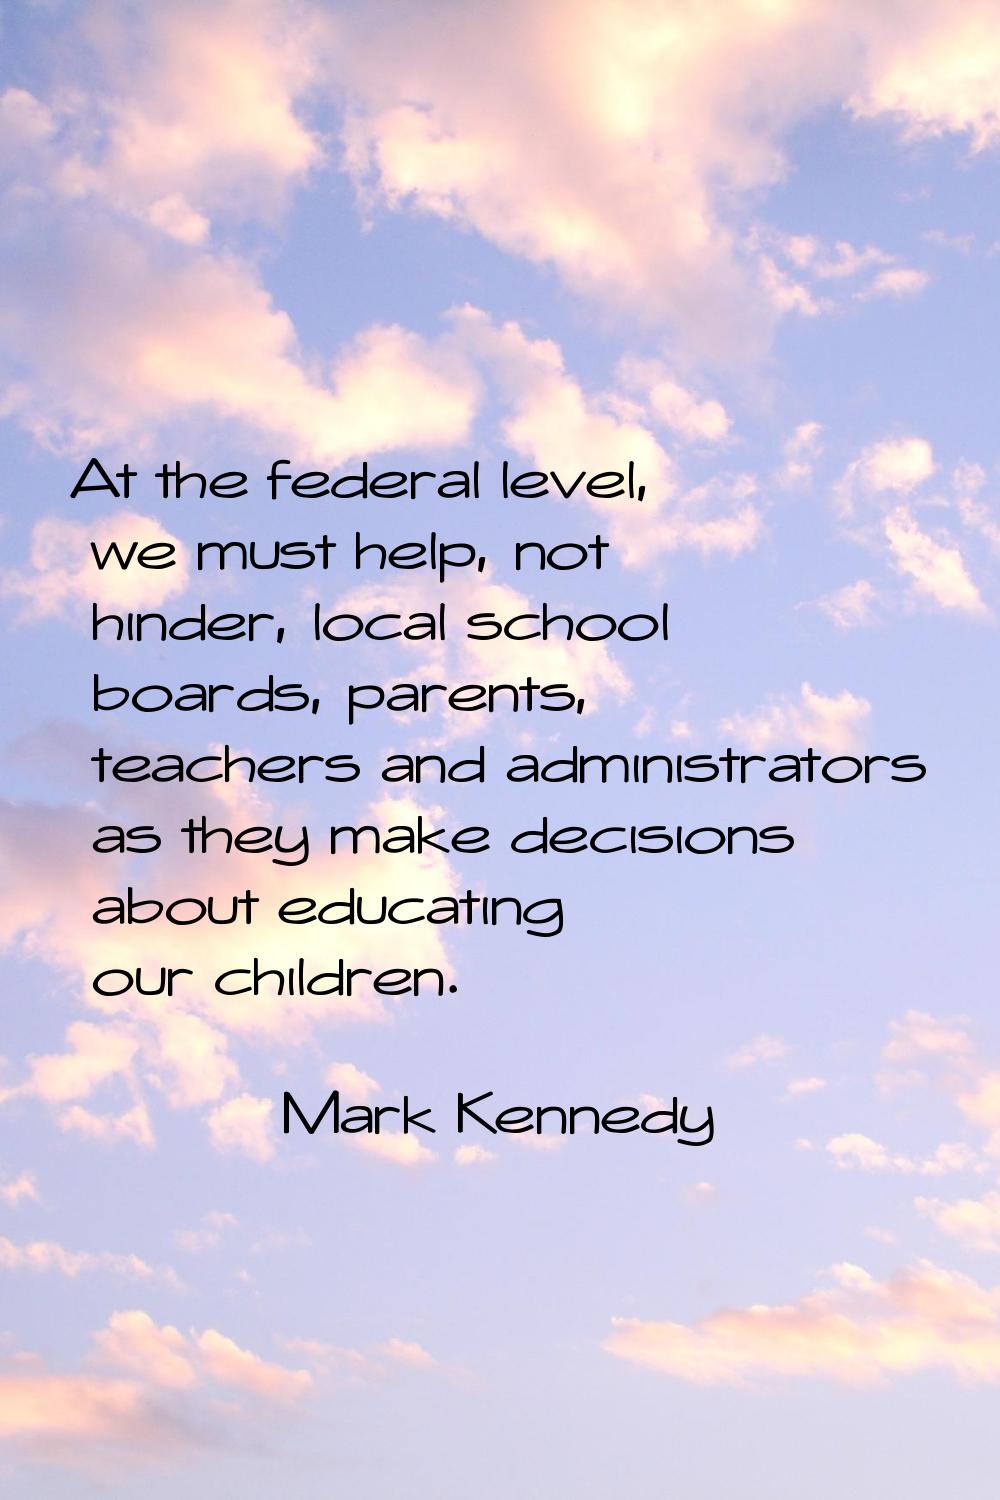 At the federal level, we must help, not hinder, local school boards, parents, teachers and administ